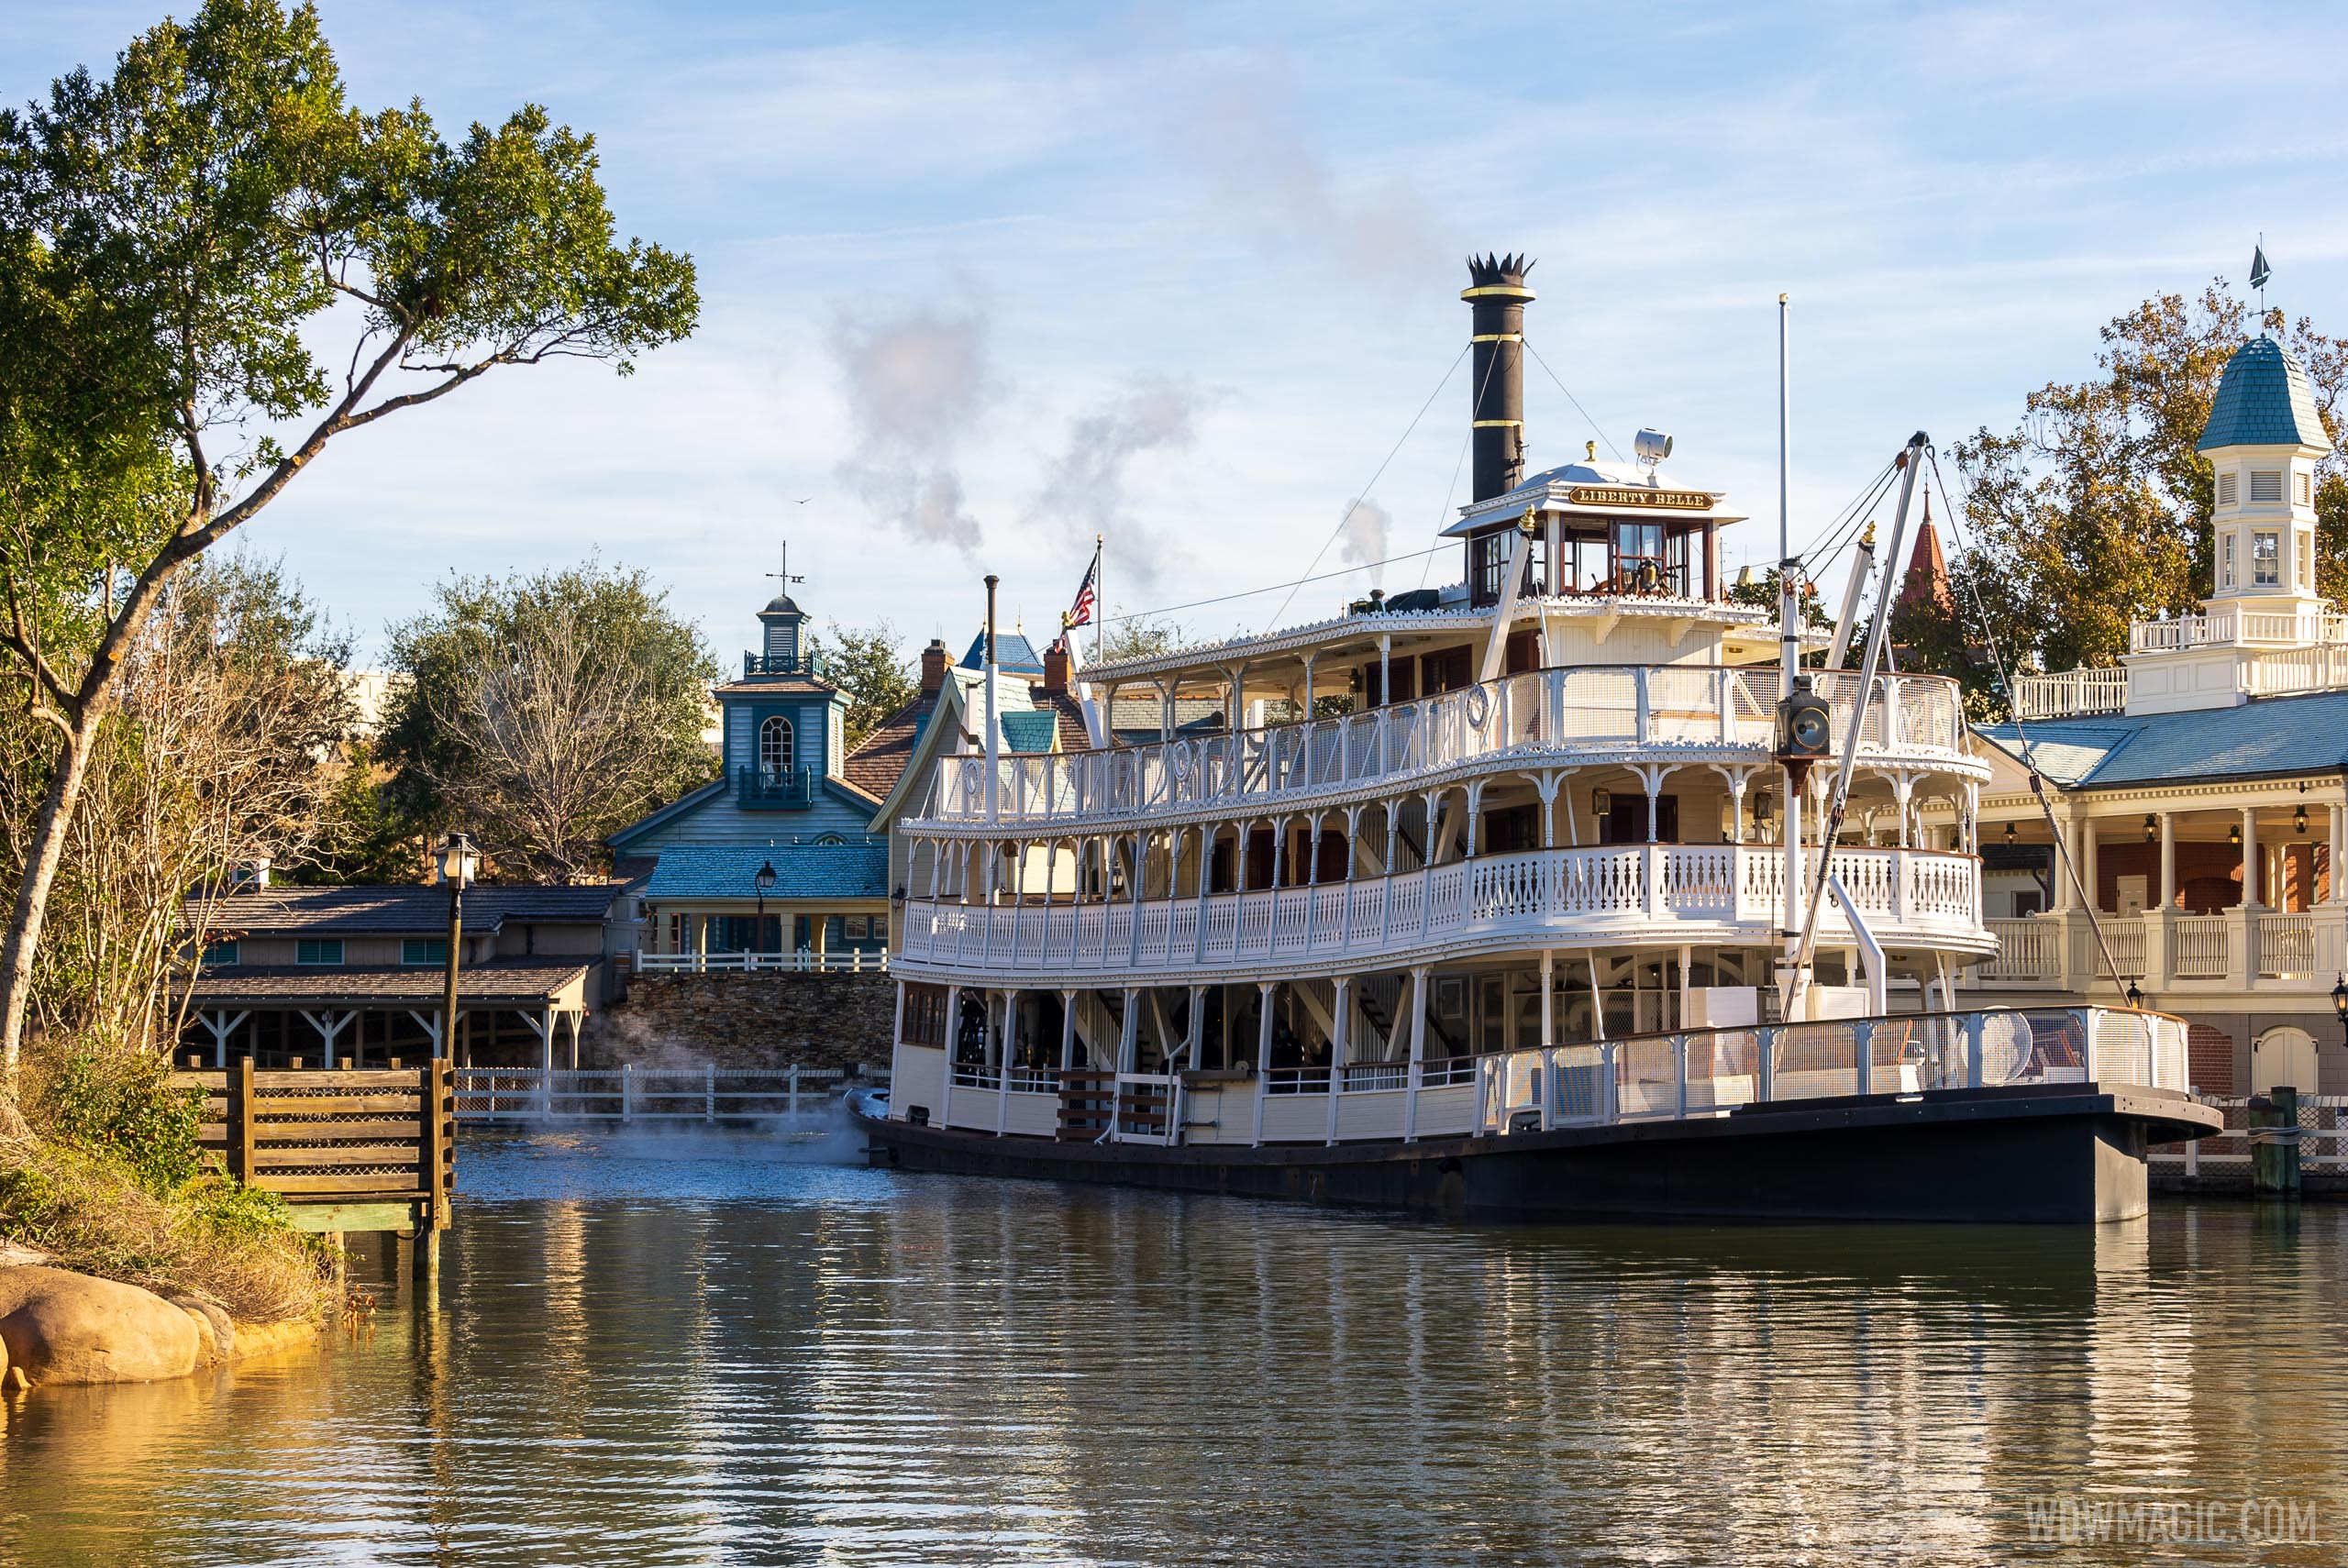 Liberty Belle returns to the Rivers of America